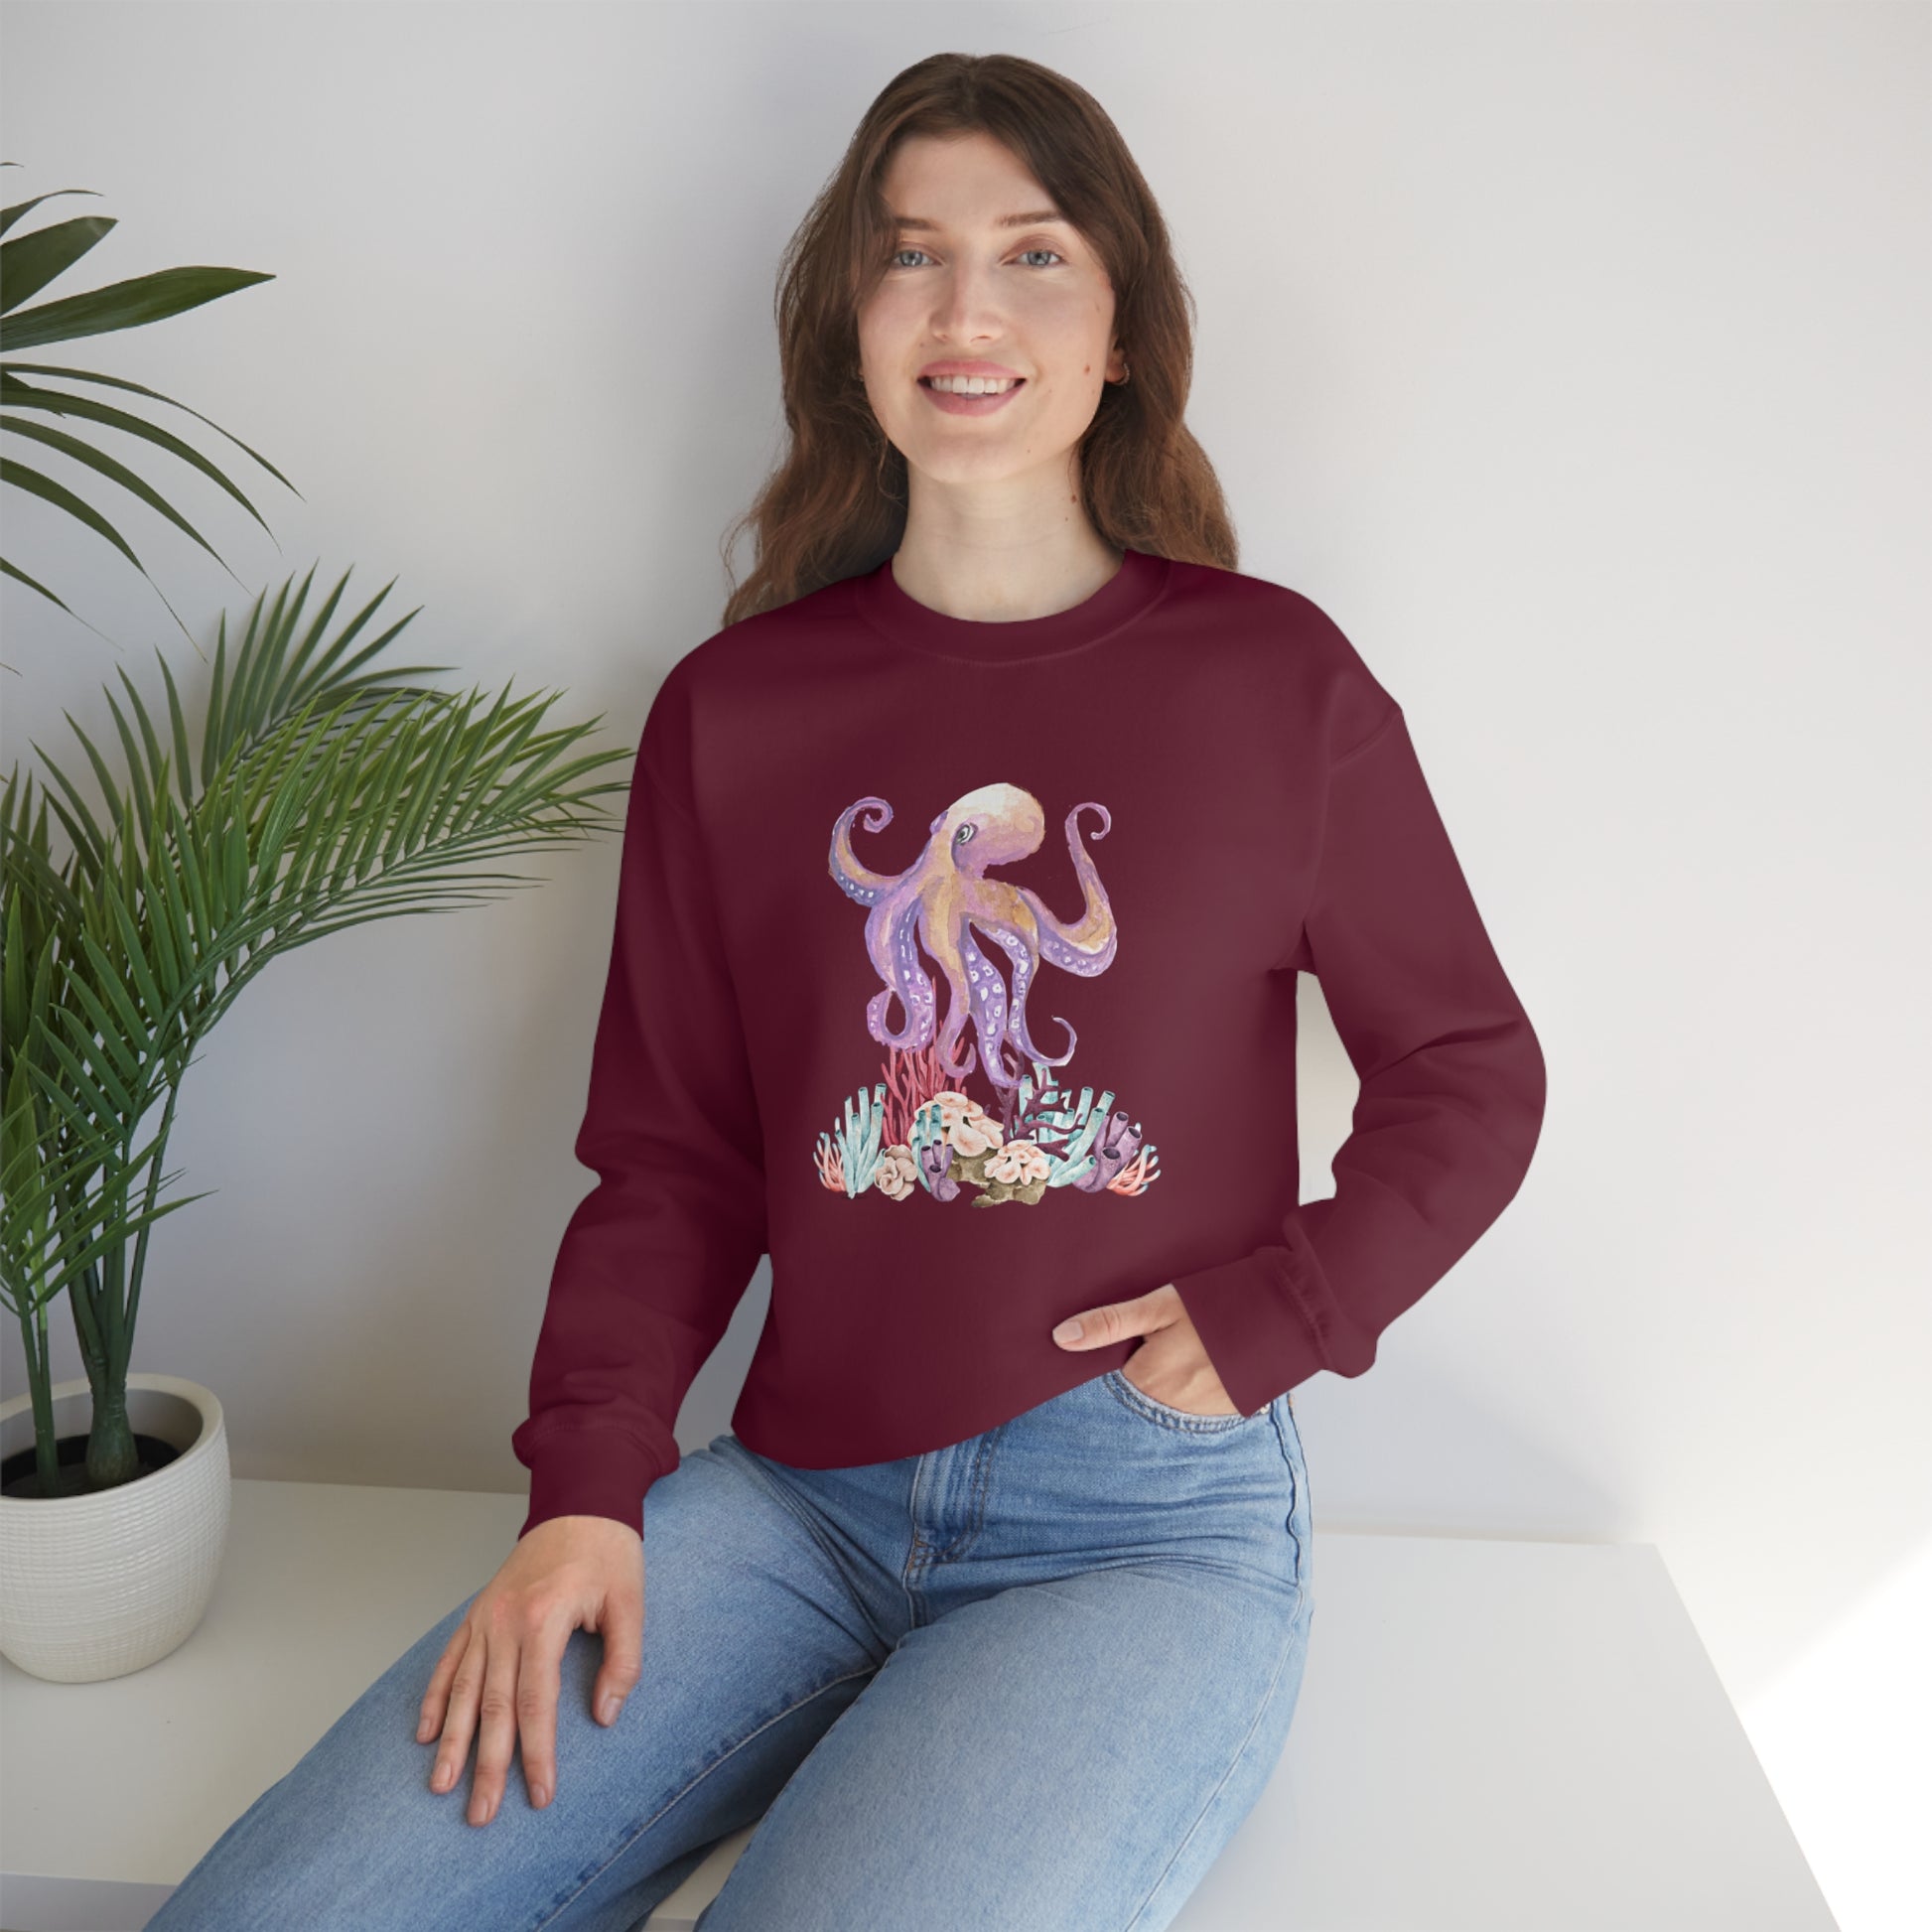 Mock up of a woman sitting on a surface wearing the Maroon shirt